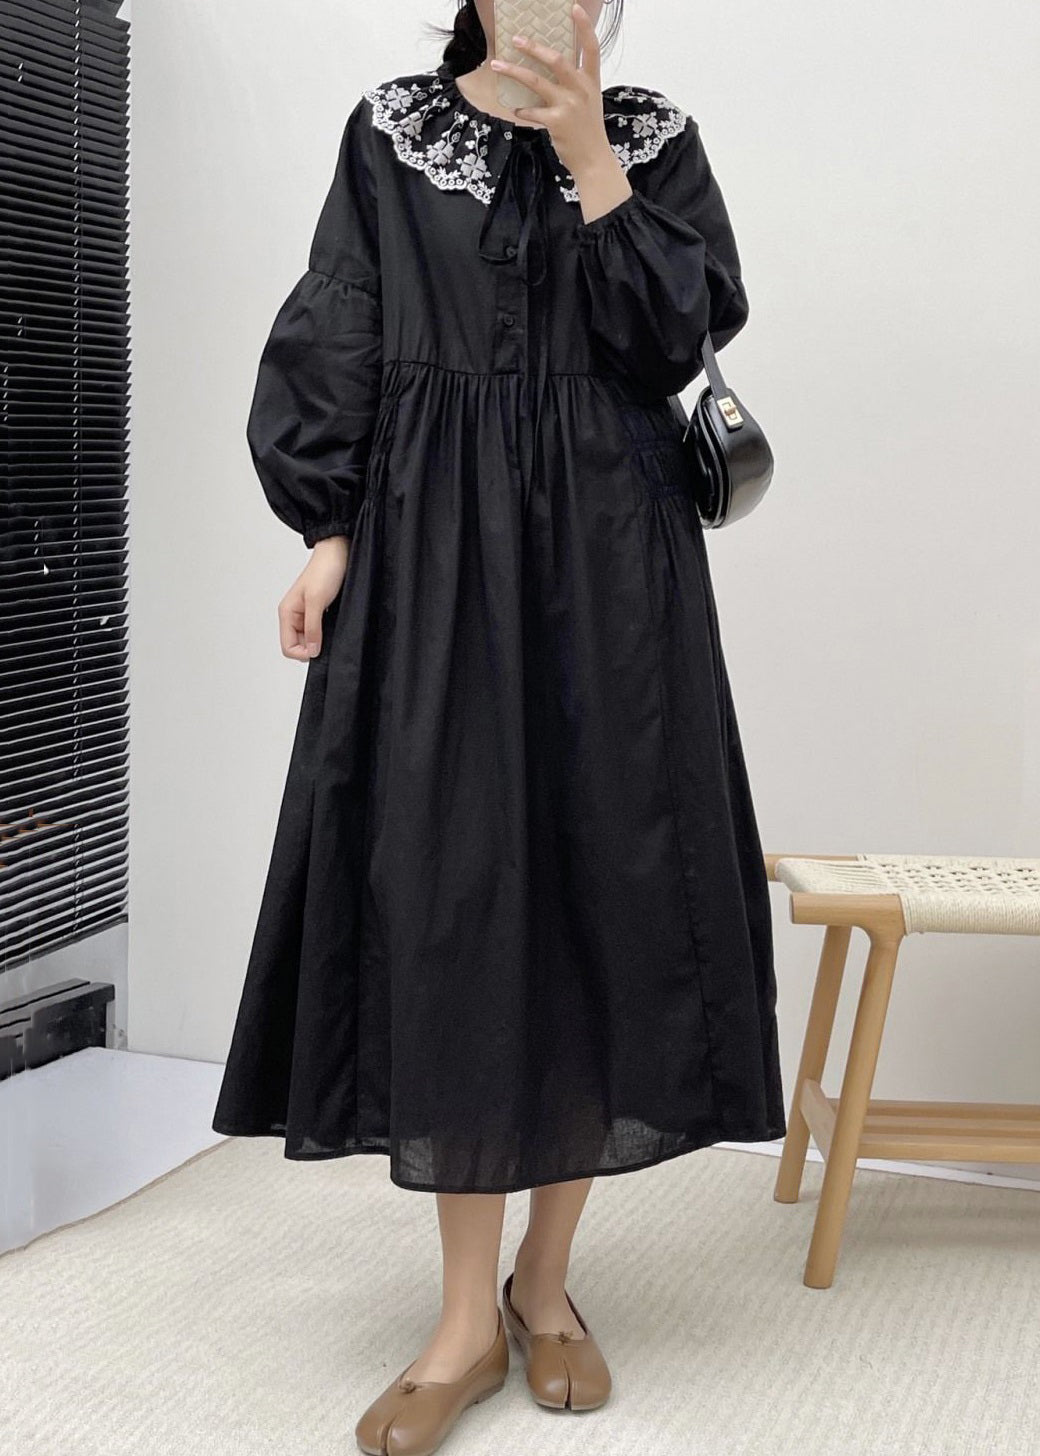 Loose Black Embroidered Lace Up Cotton Dress Spring